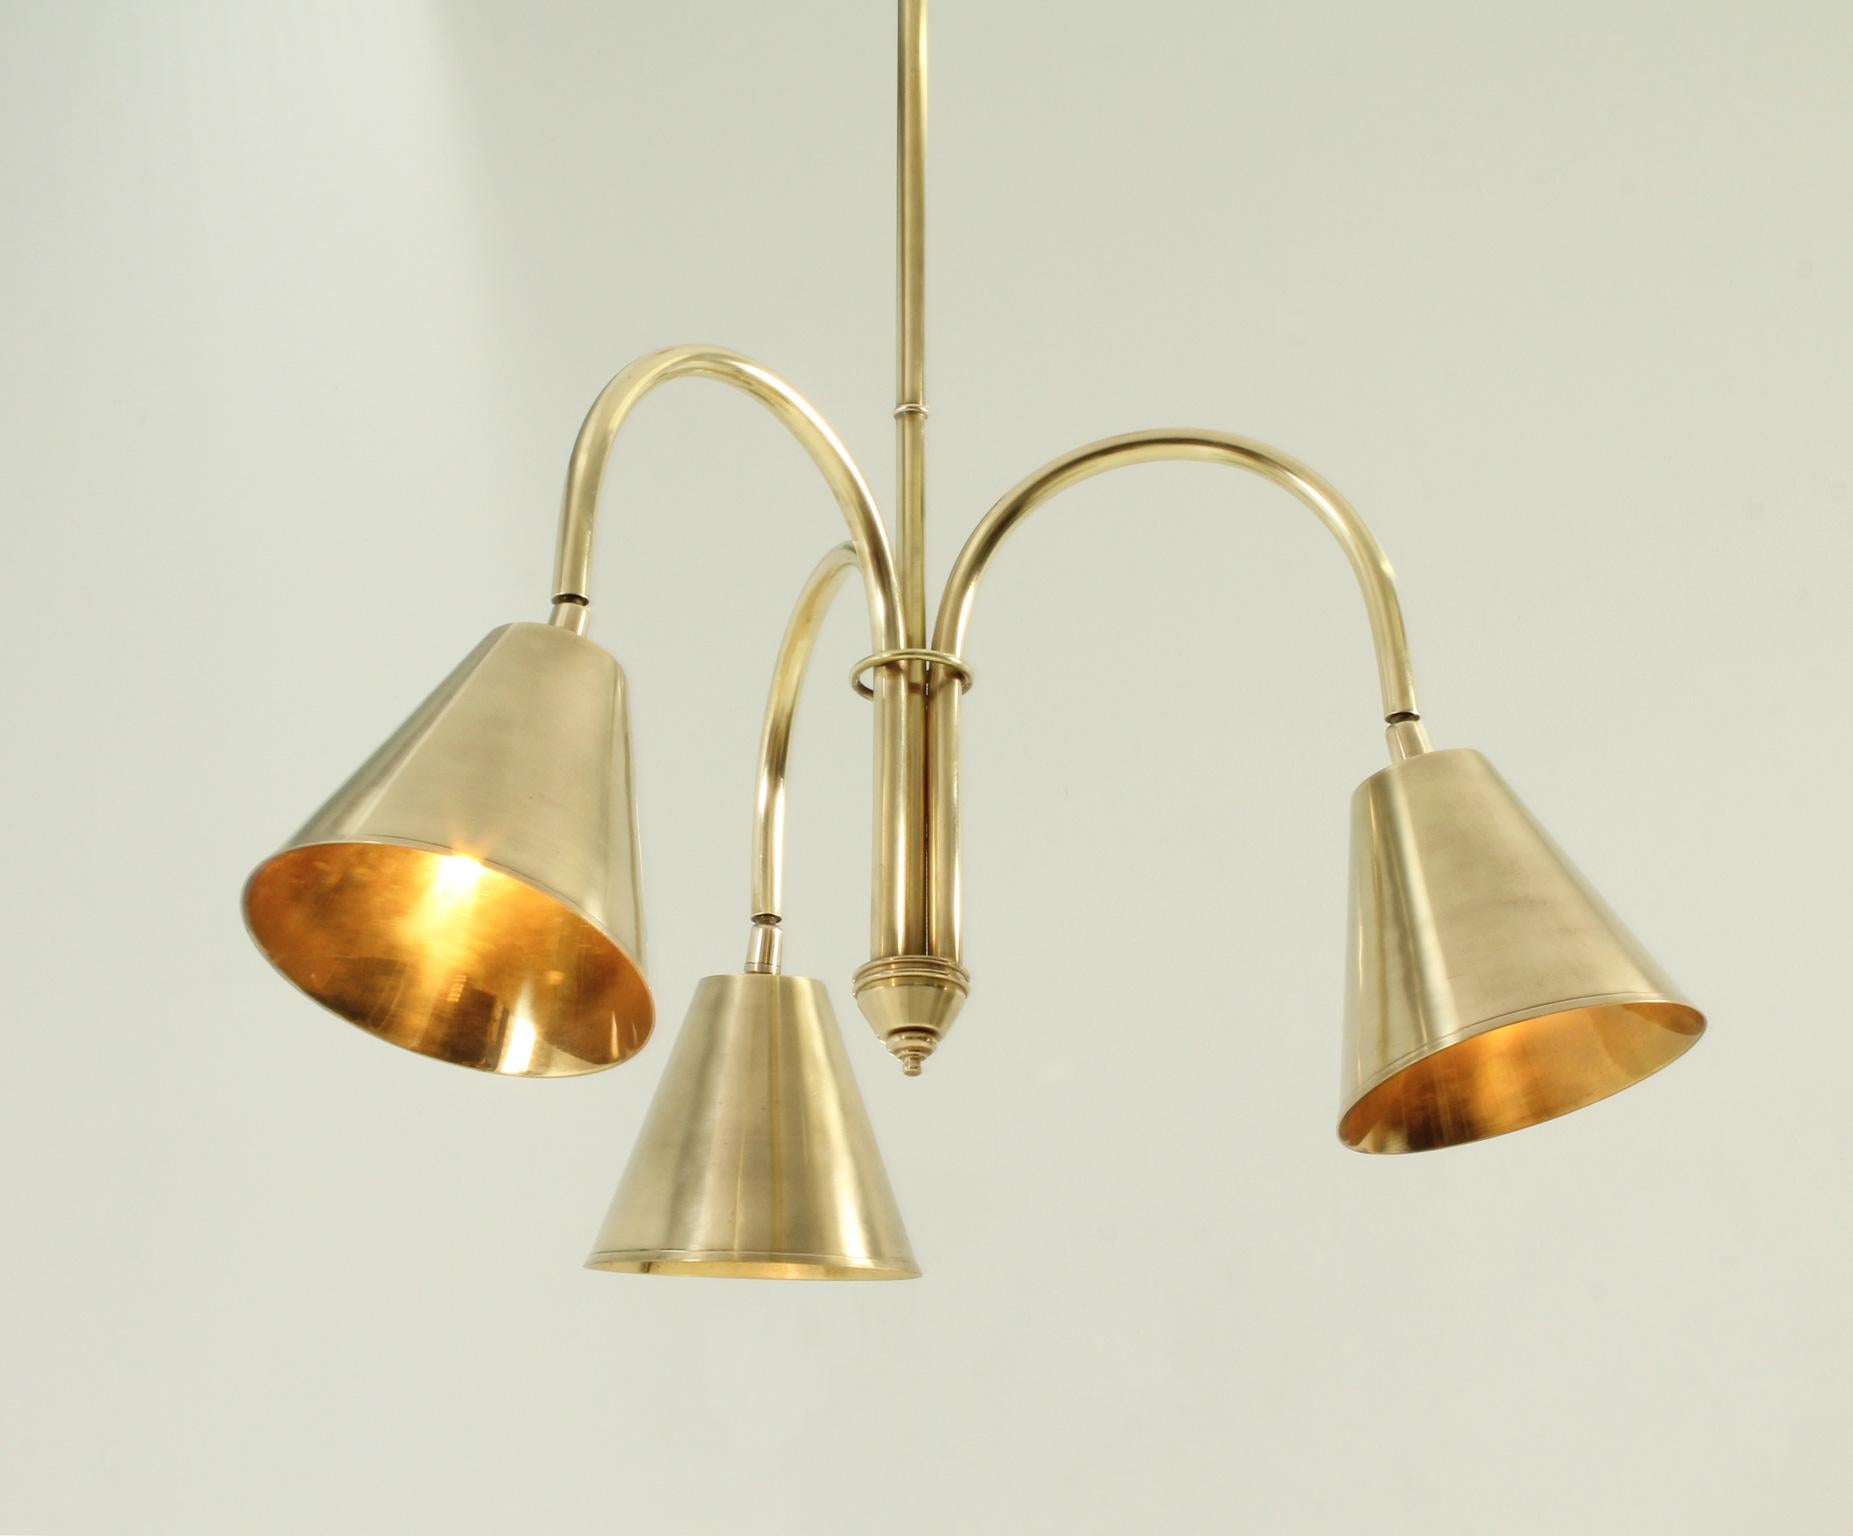 Very rare ceiling lamp produced in 1950's by Valenti, Spain. Edition entirely in brass with a ball joint in each shade that allows movement. Signed.